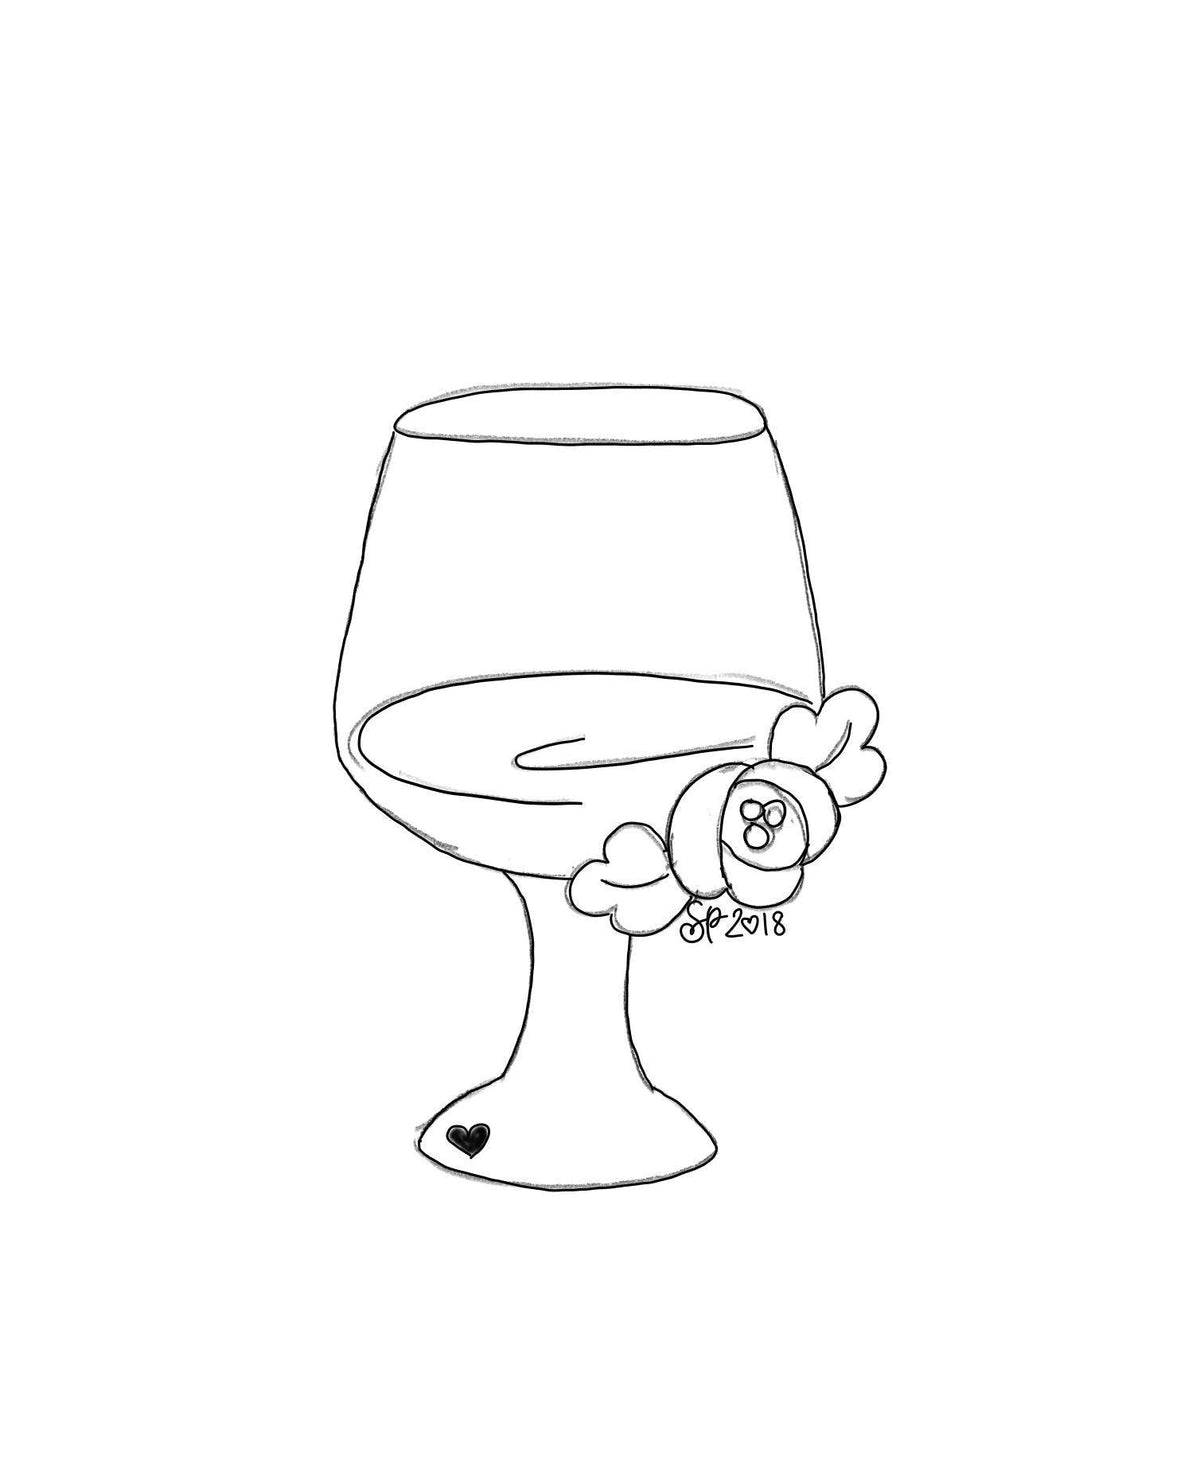 Floral Wine Glass 1 Cookie Cutter - Sweetleigh 